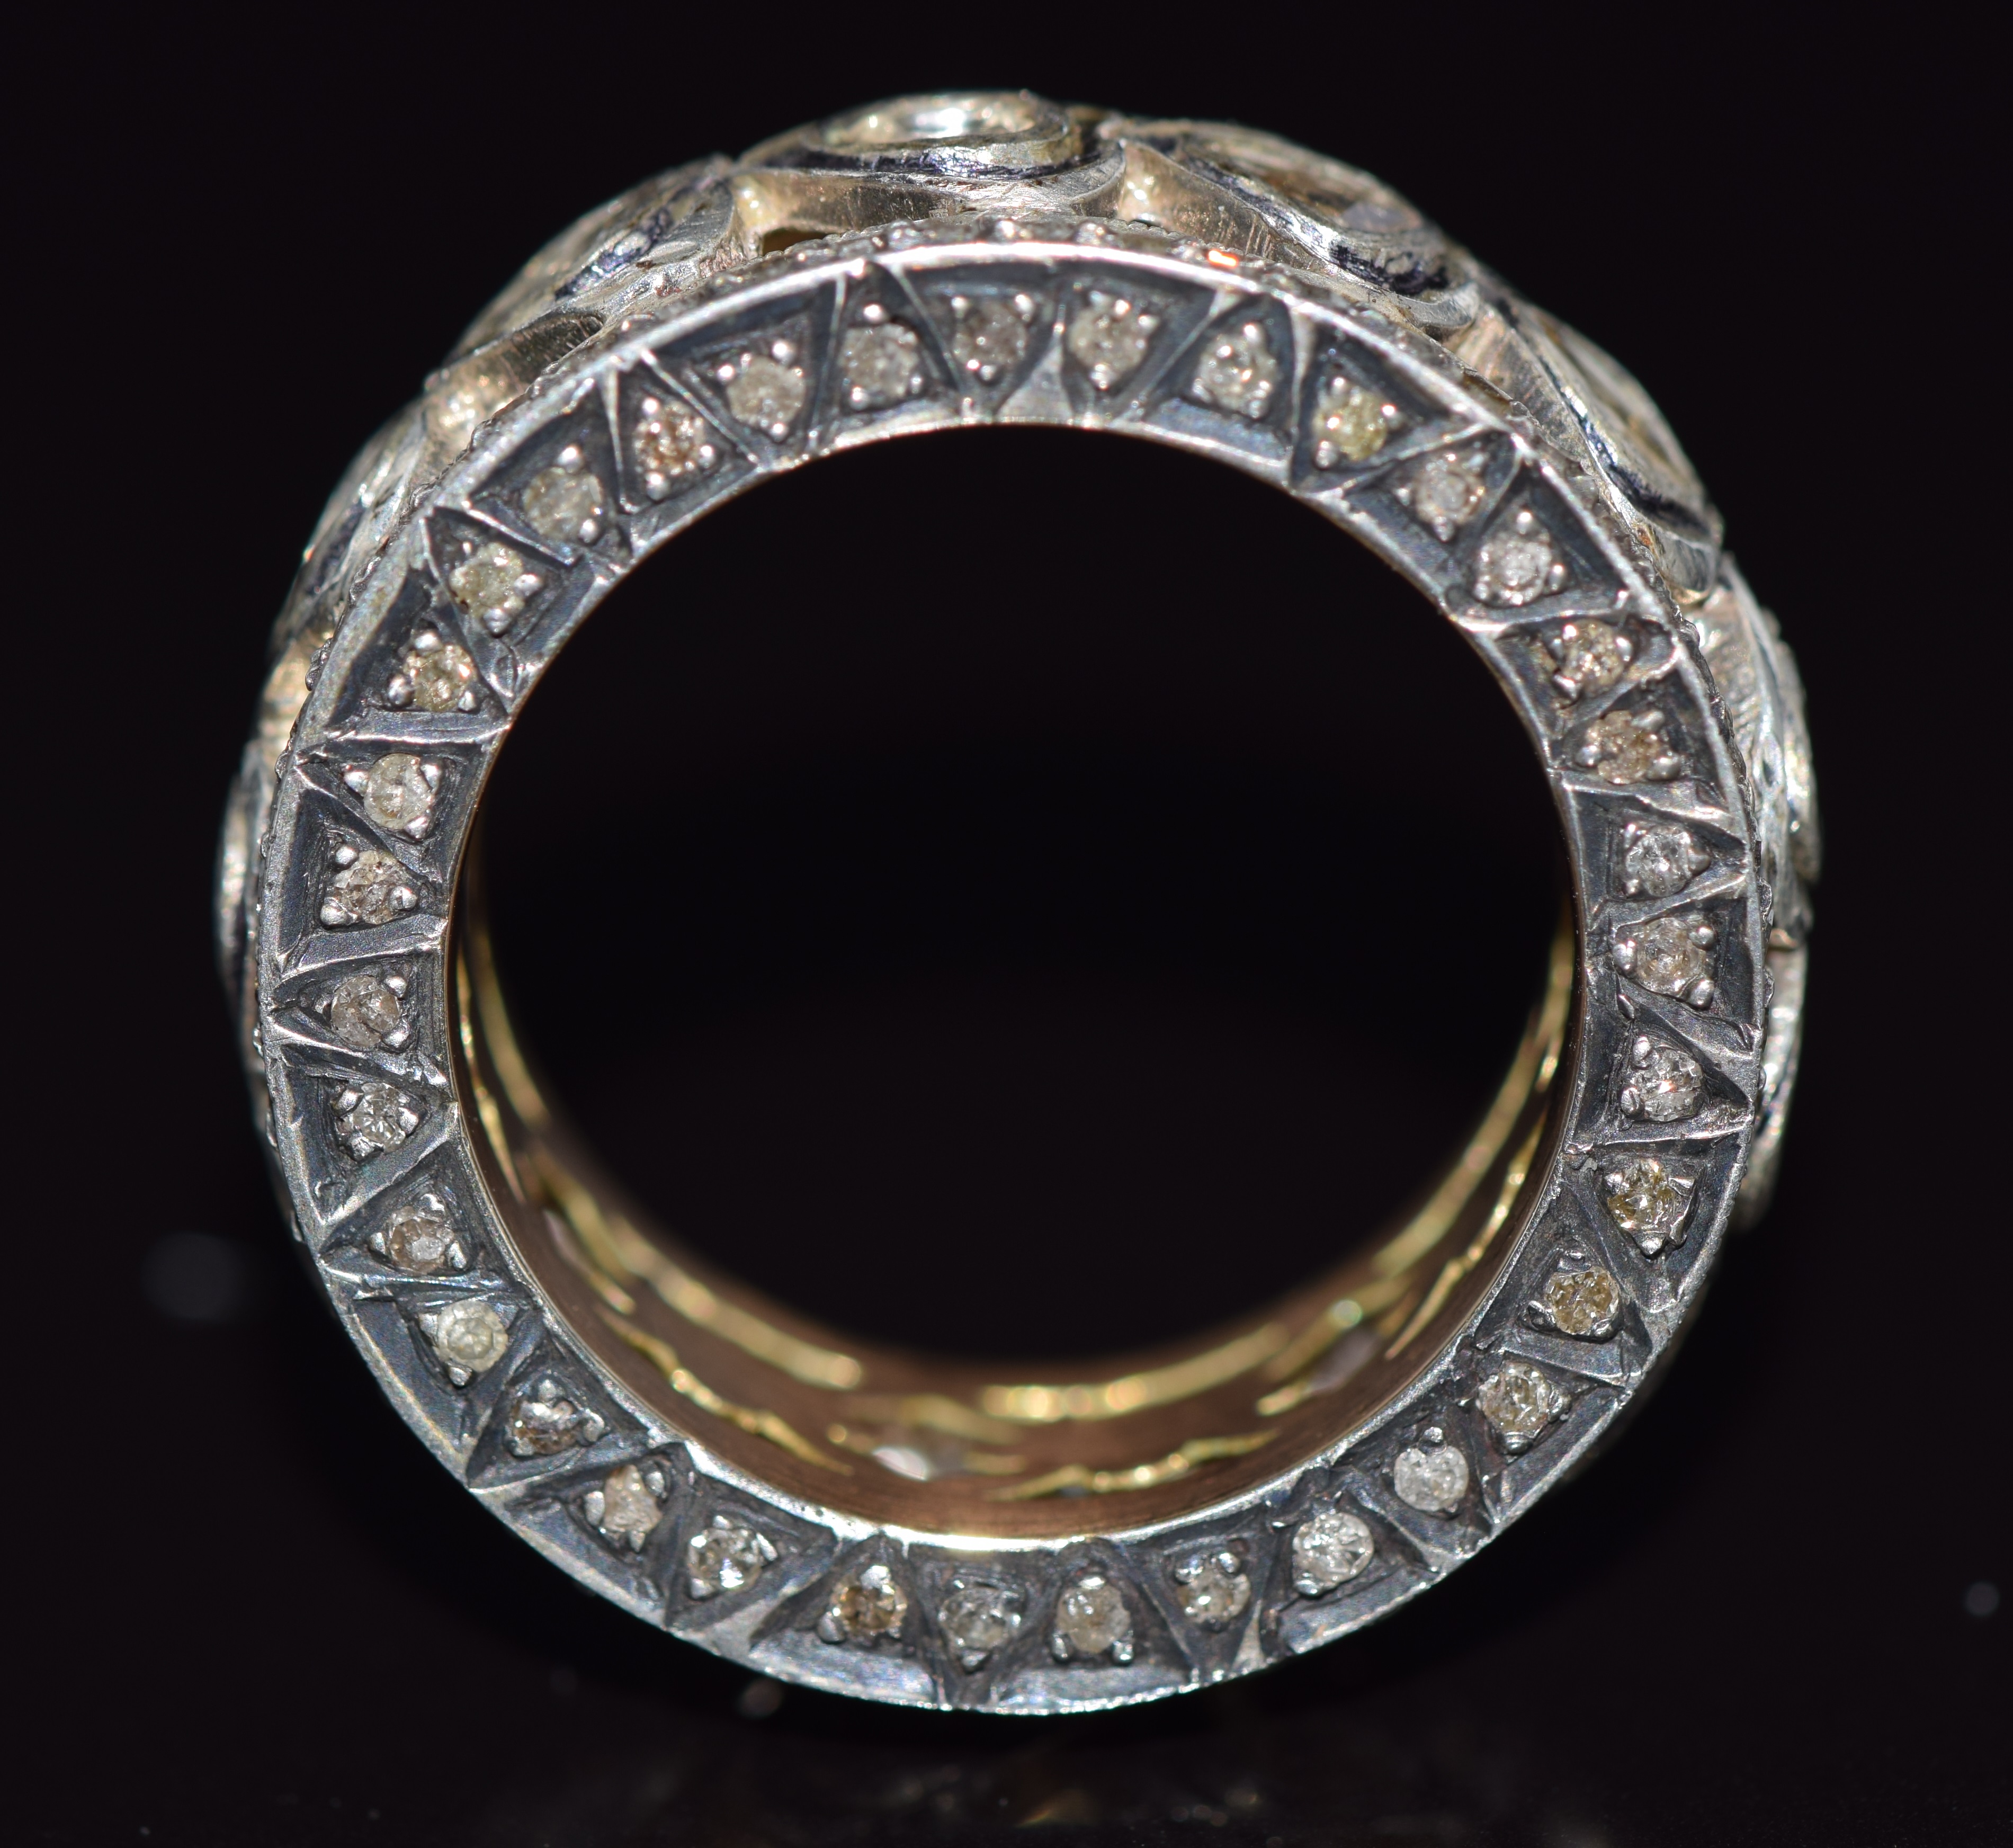 A large pierced gold ring set with diamonds in foiled settings with further diamonds to the edges - Image 2 of 2